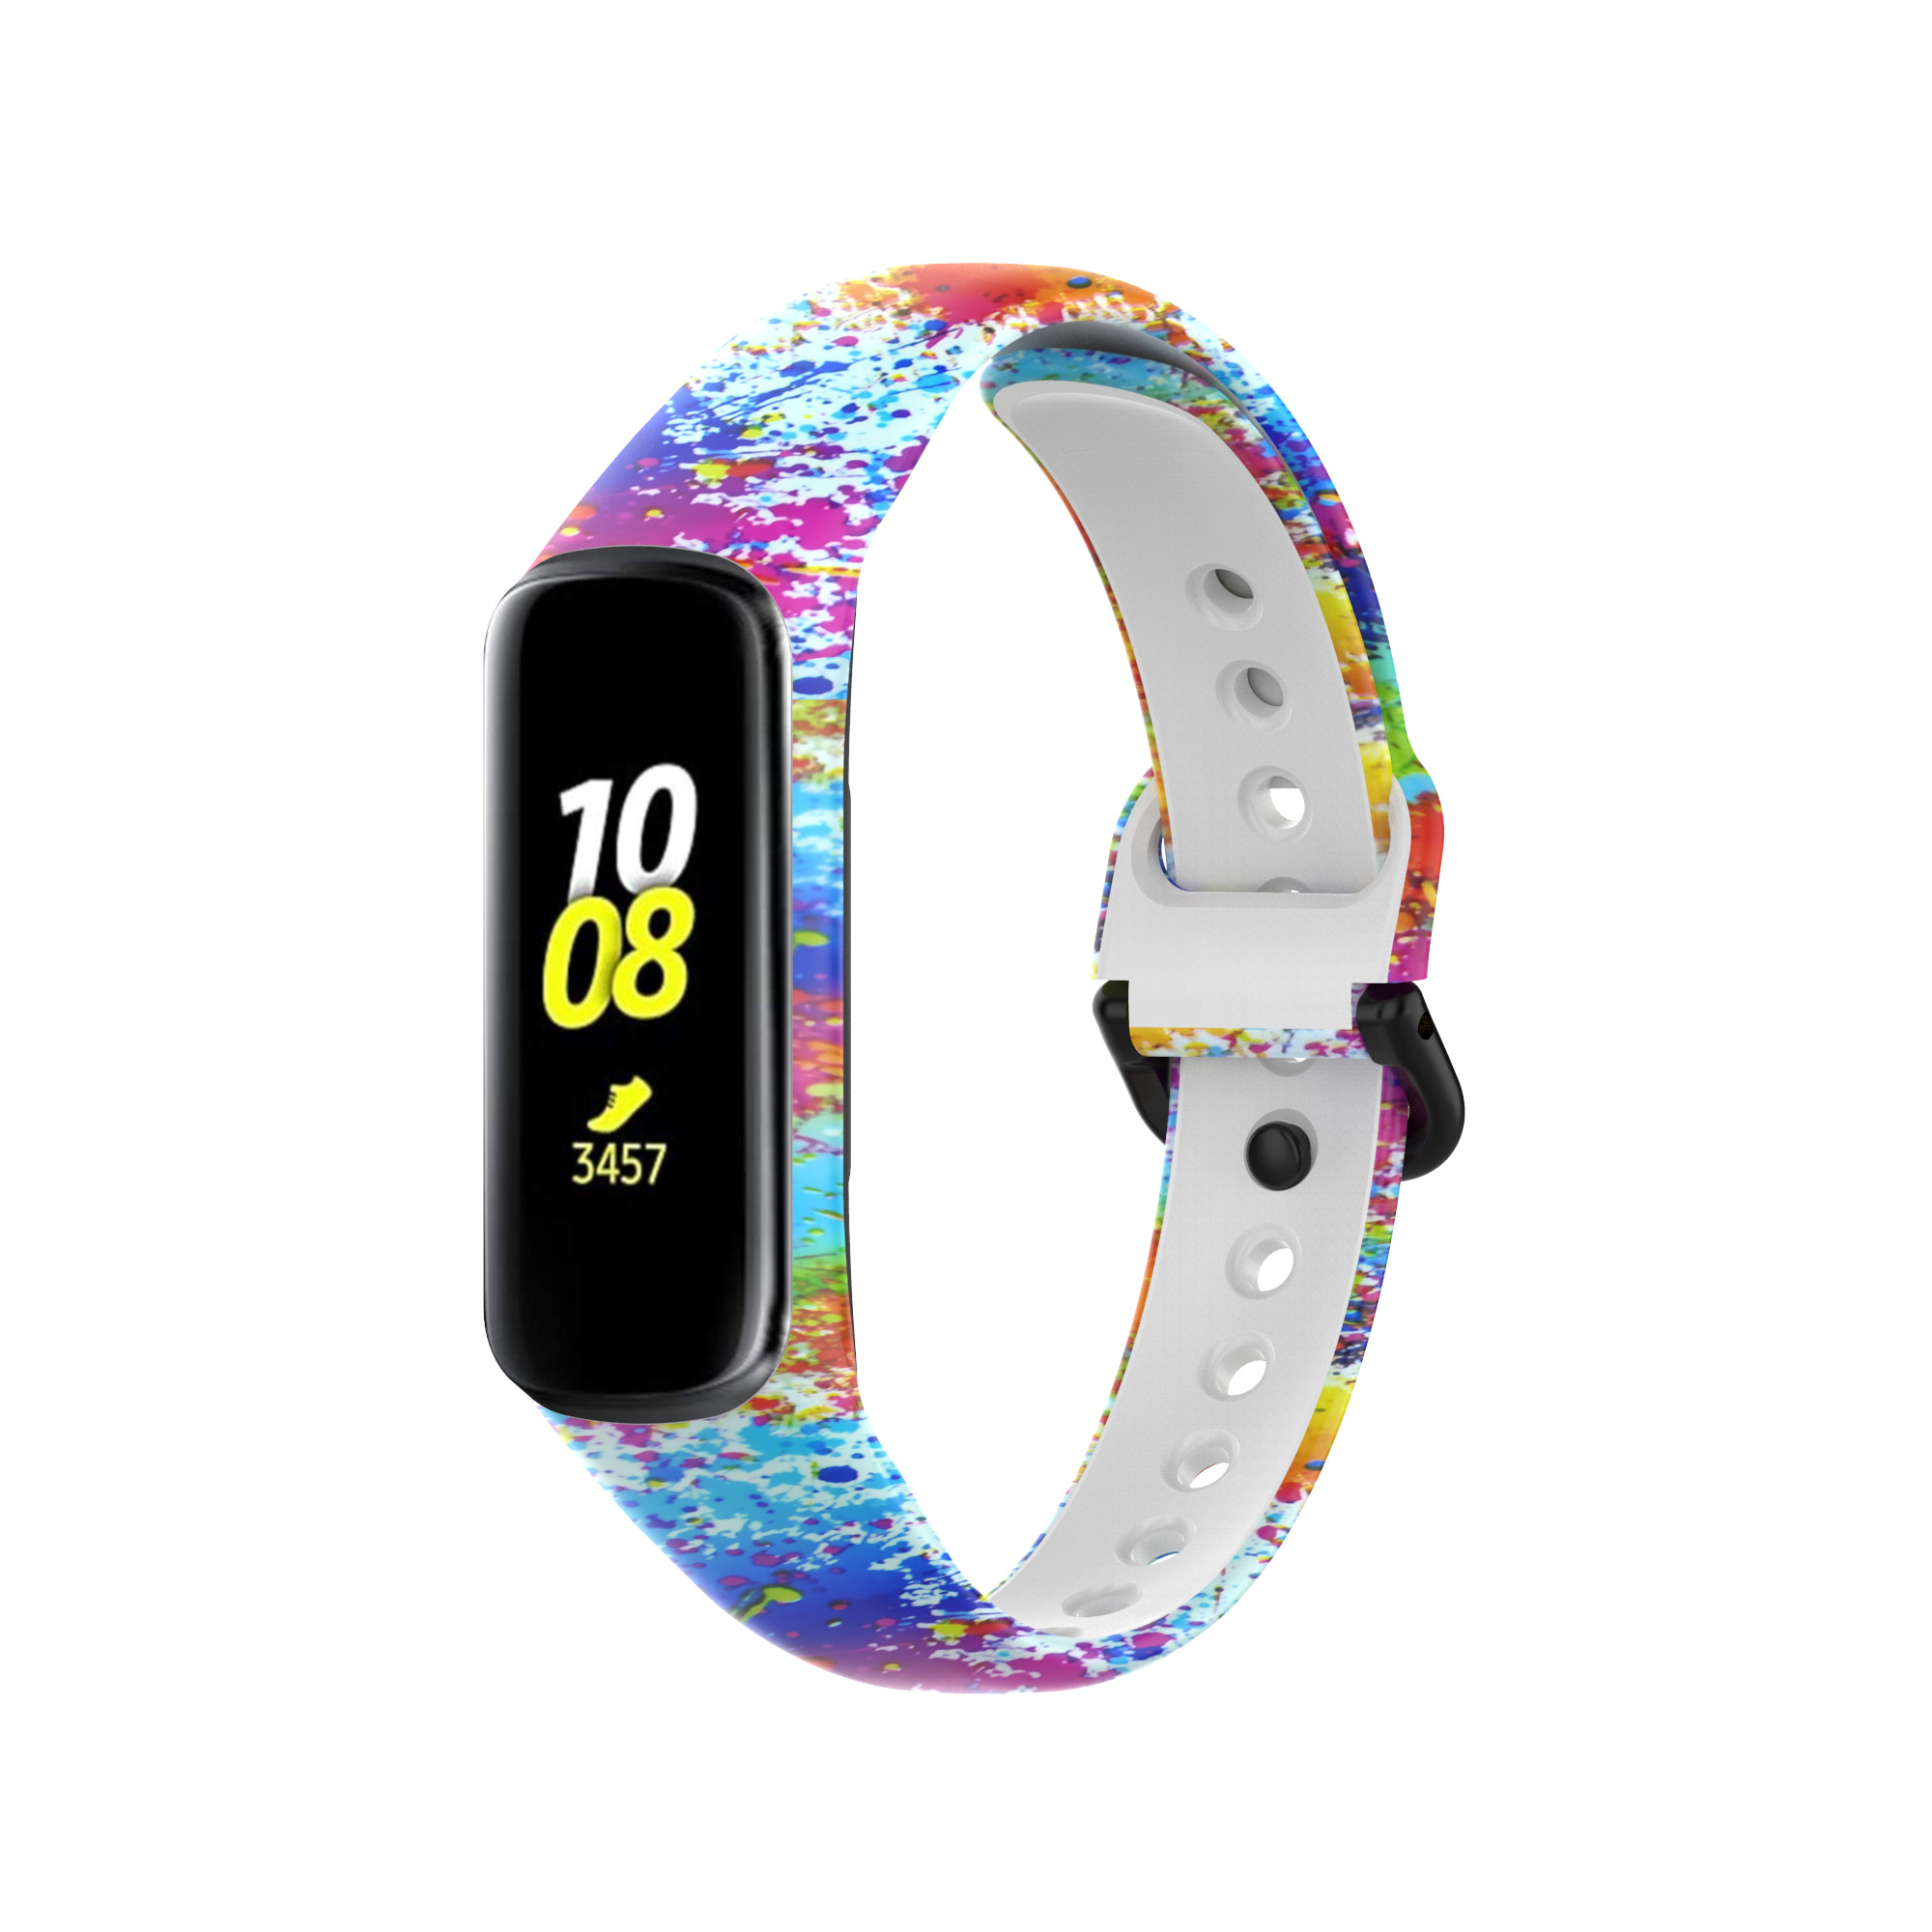 Bakeey-Printed-Pattern-Stainless-Steel-Buckle-Smart-watch-Band-Replacement-Strap-For-Samsung-Galaxy--1806217-6